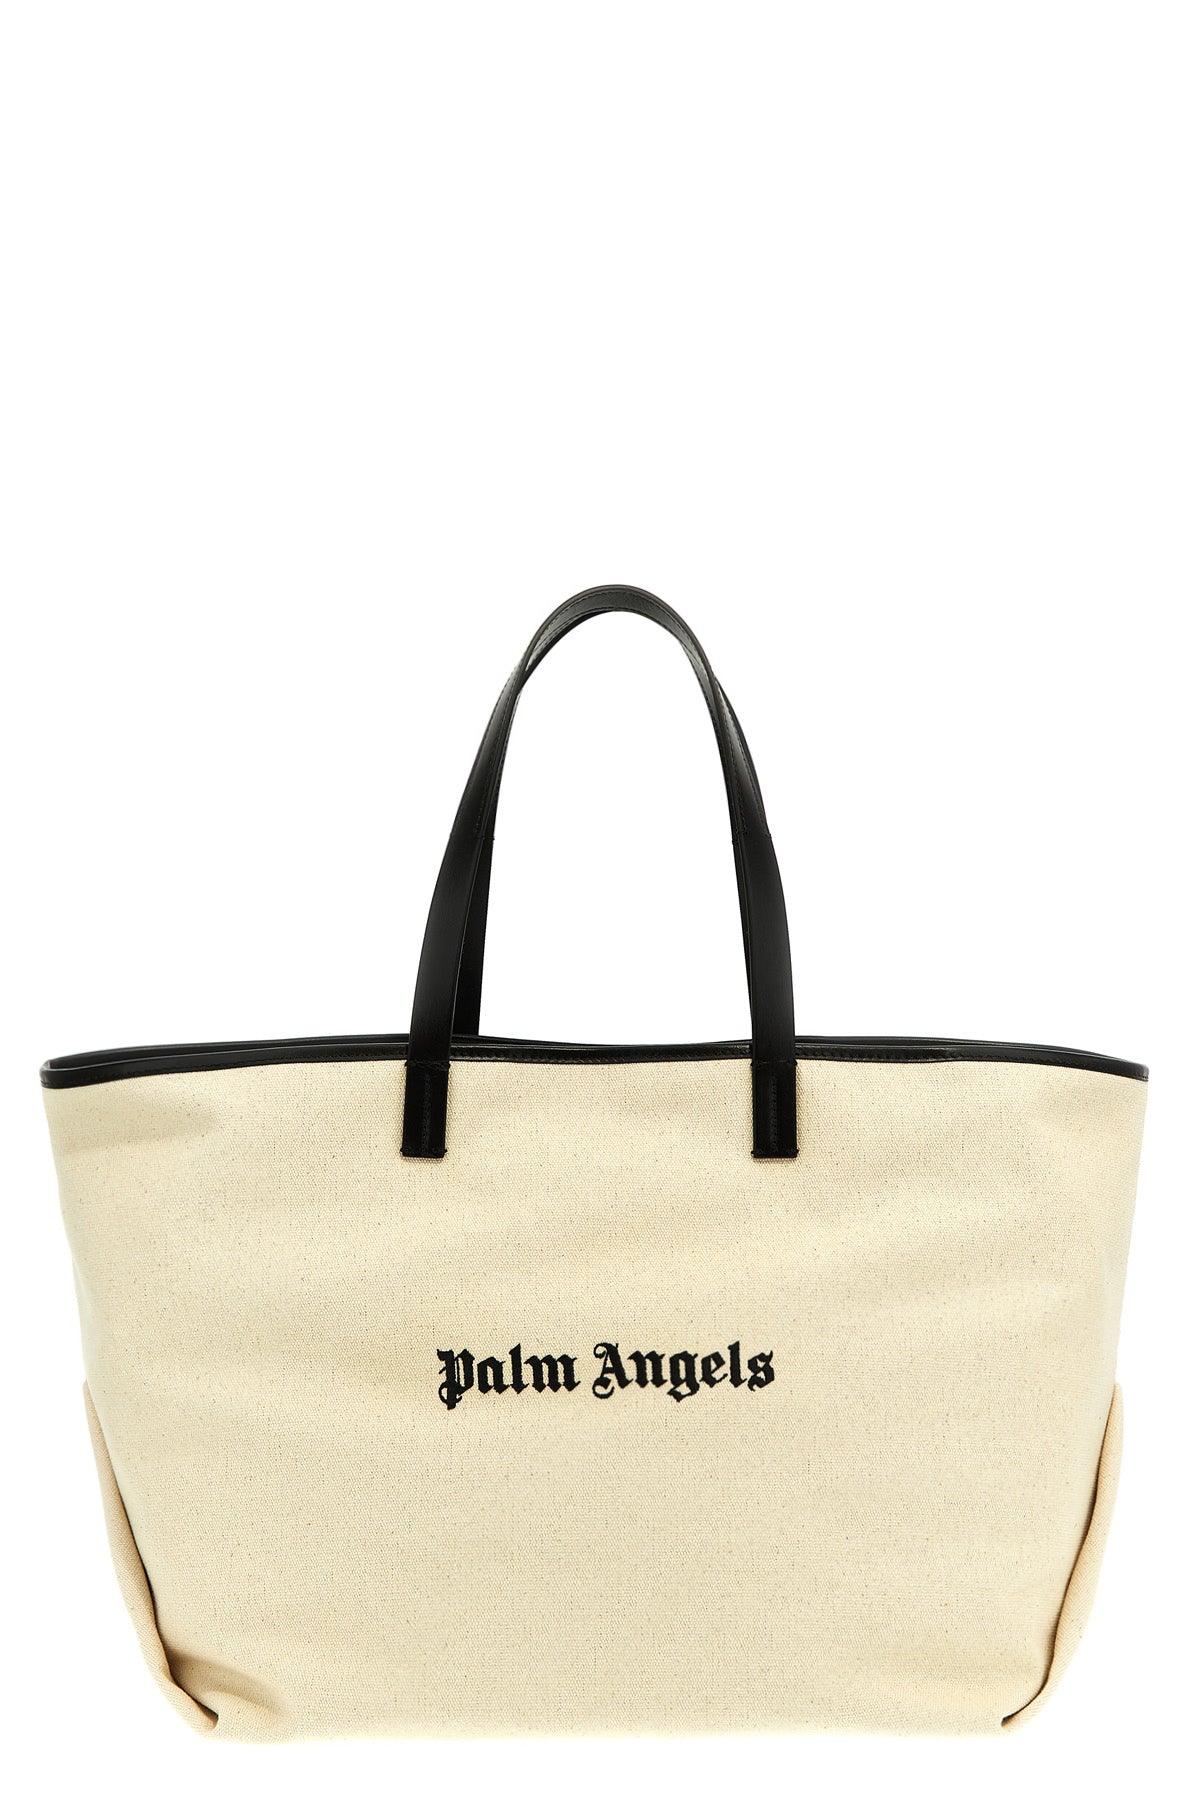 PALM ANGELS LOGO EMBROIDERY SHOPPING BAG – Stok